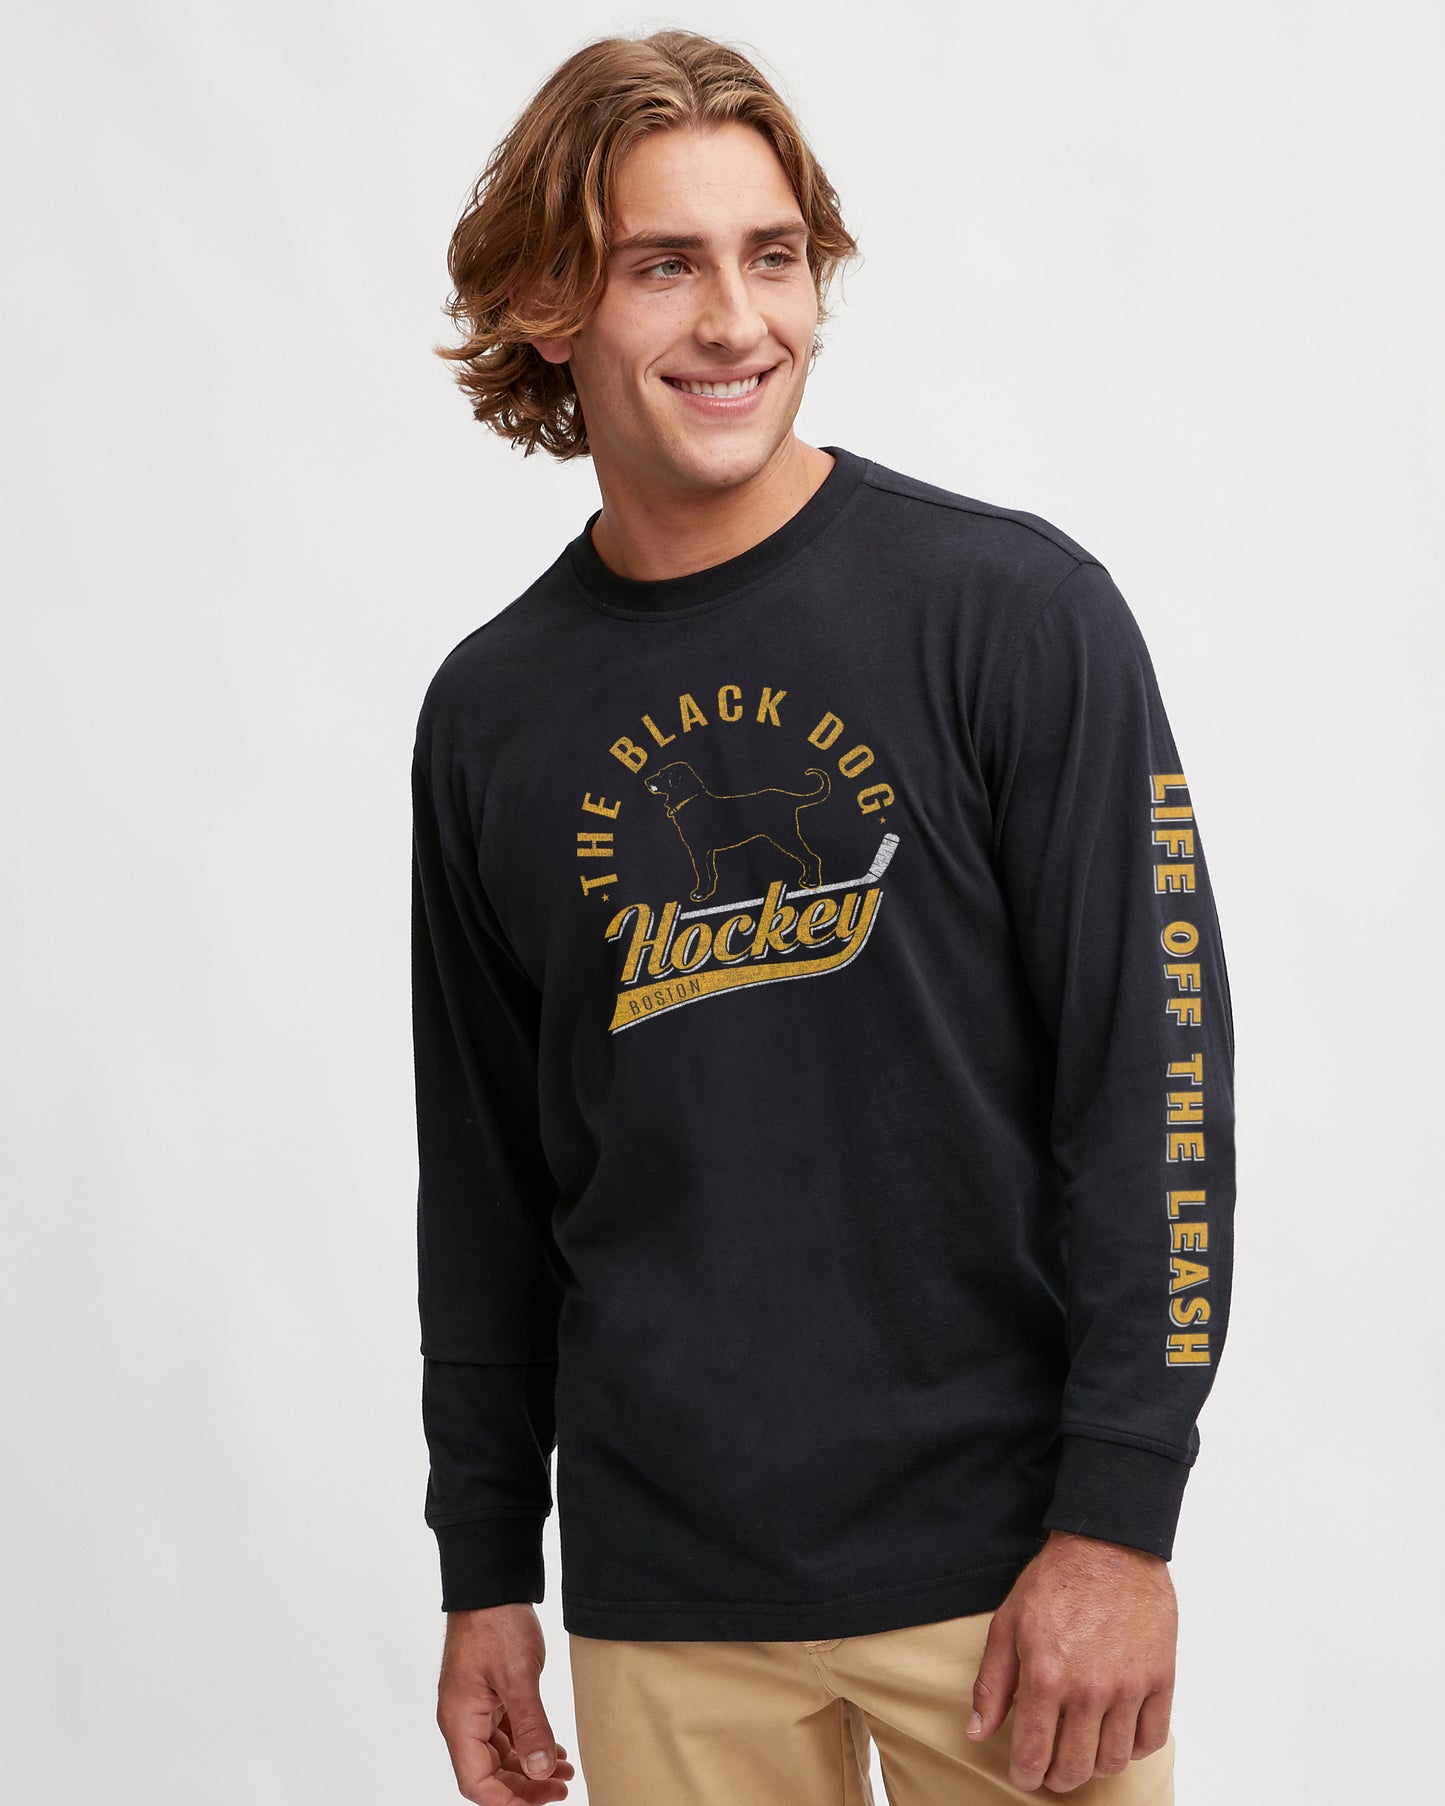 Adult Longsleeve Black And Gold Tee